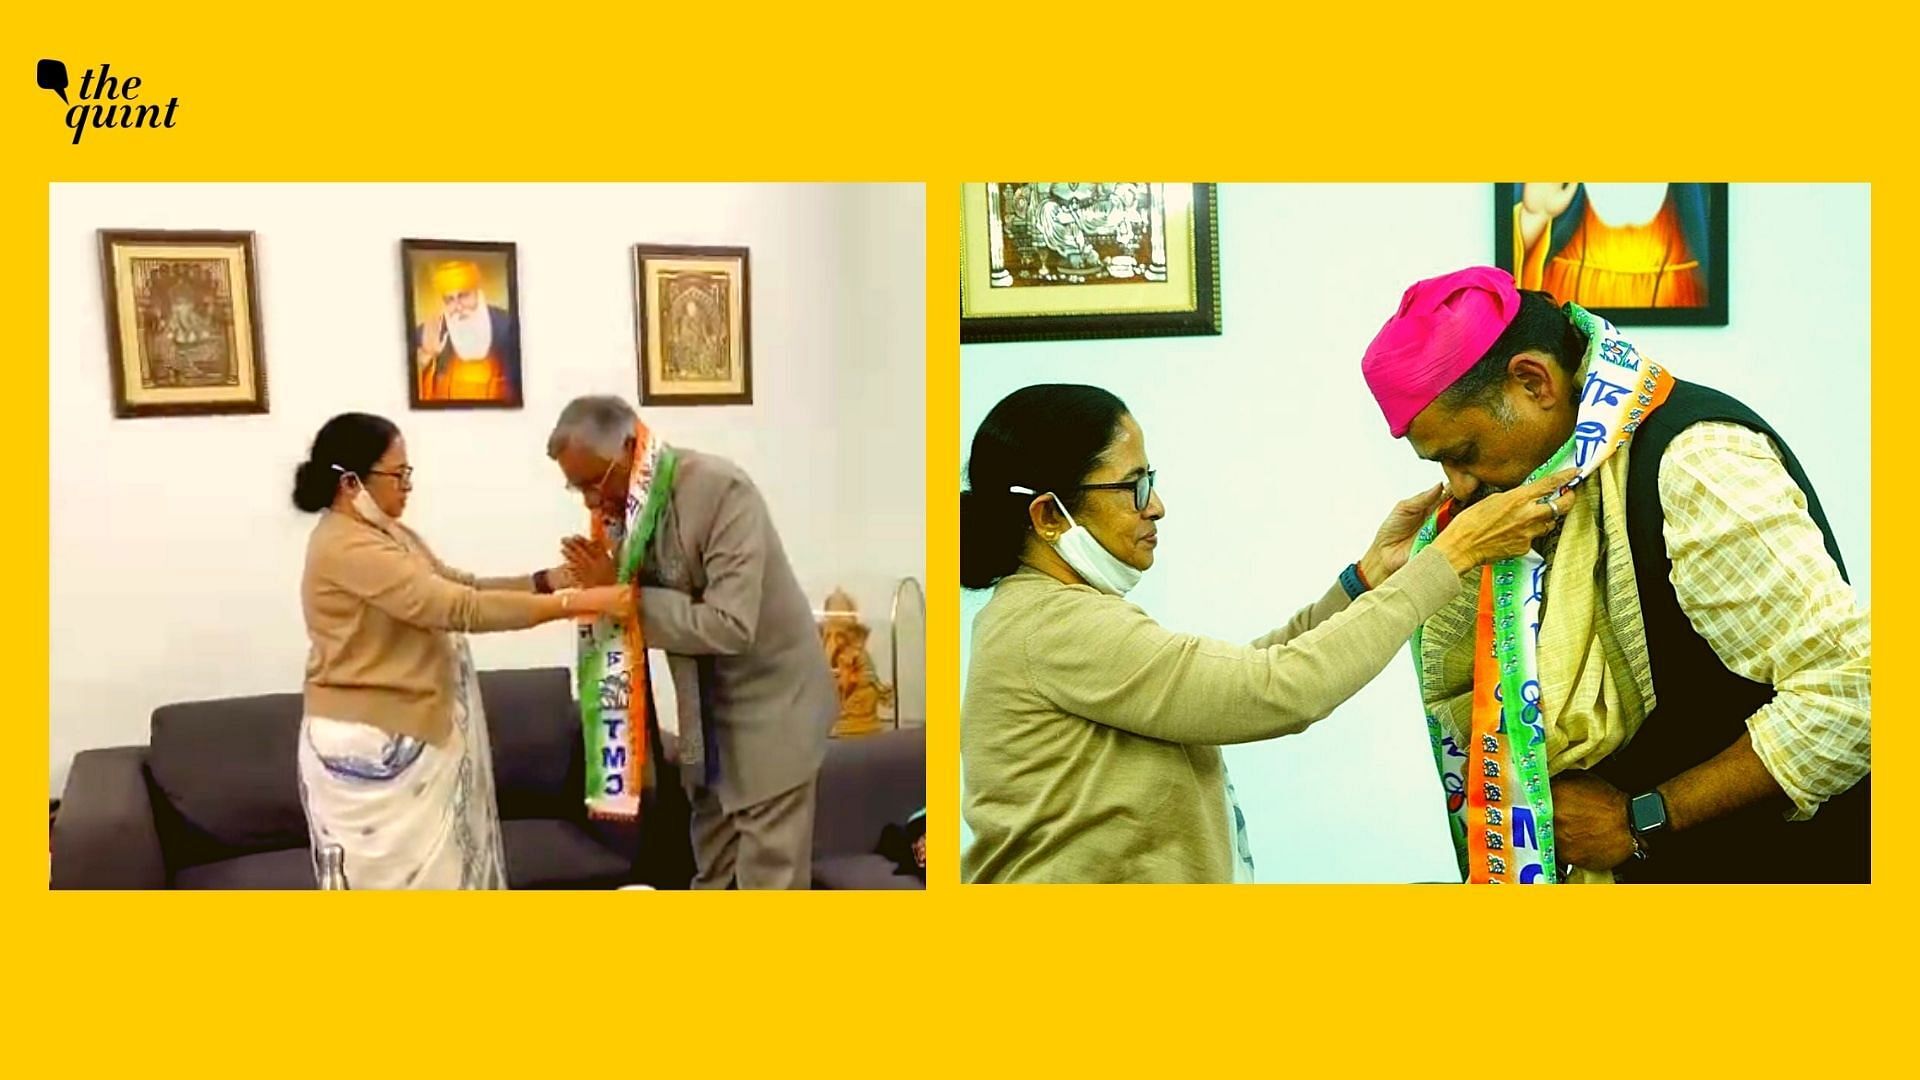 <div class="paragraphs"><p>Former JD(U) leader Pavan Varma on Tuesday, 23 November, joined the Trinamool Congress in the presence of West Bengal Chief Minister Mamata Banerjee in<strong> </strong>New Delhi. Later in the day, Congress leader Kirti Azad was also inducted in the party in the national capital.</p></div>